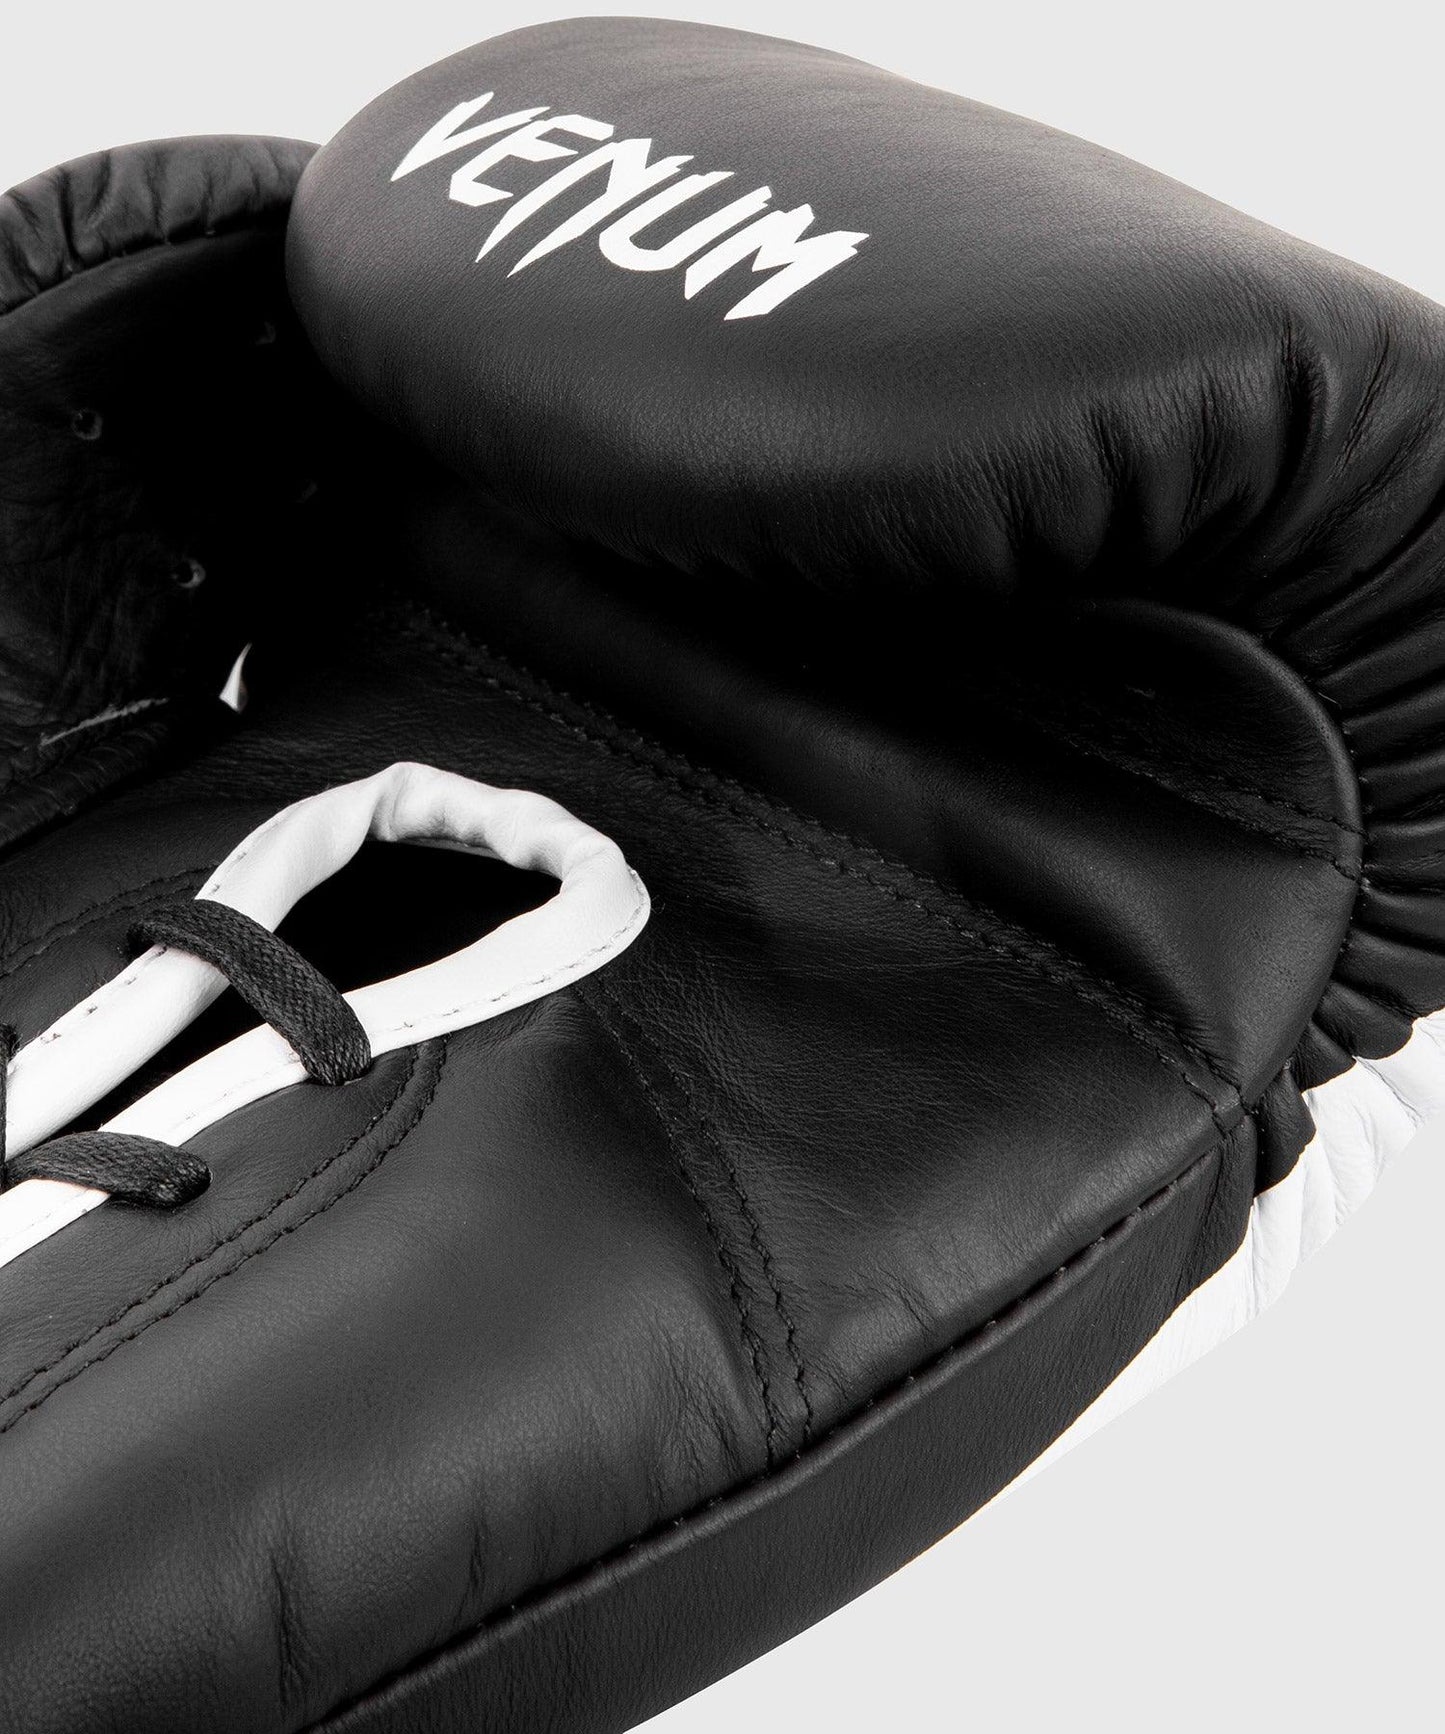 Venum Giant 2.0 Pro Boxing Gloves - With Laces - Black/White Picture 5